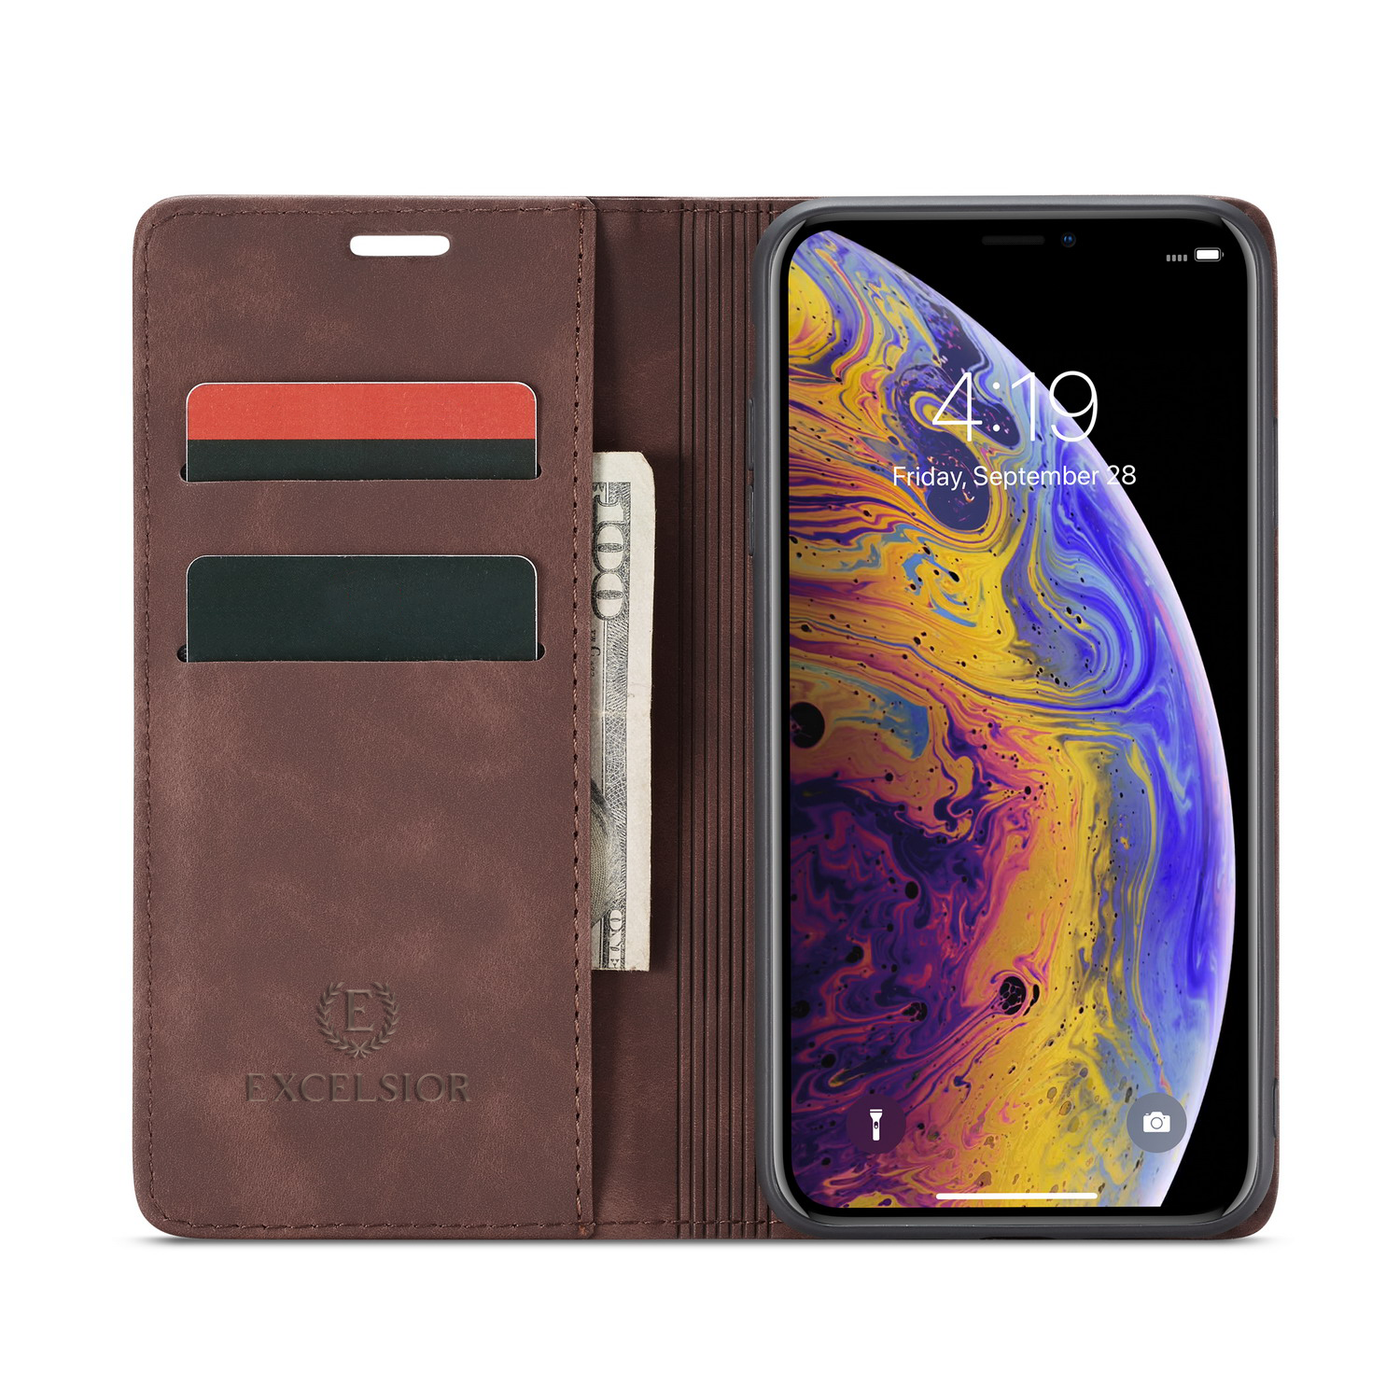 Apple iPhone XS Max Leather Wallet flip case cover with card slots by Excelsior